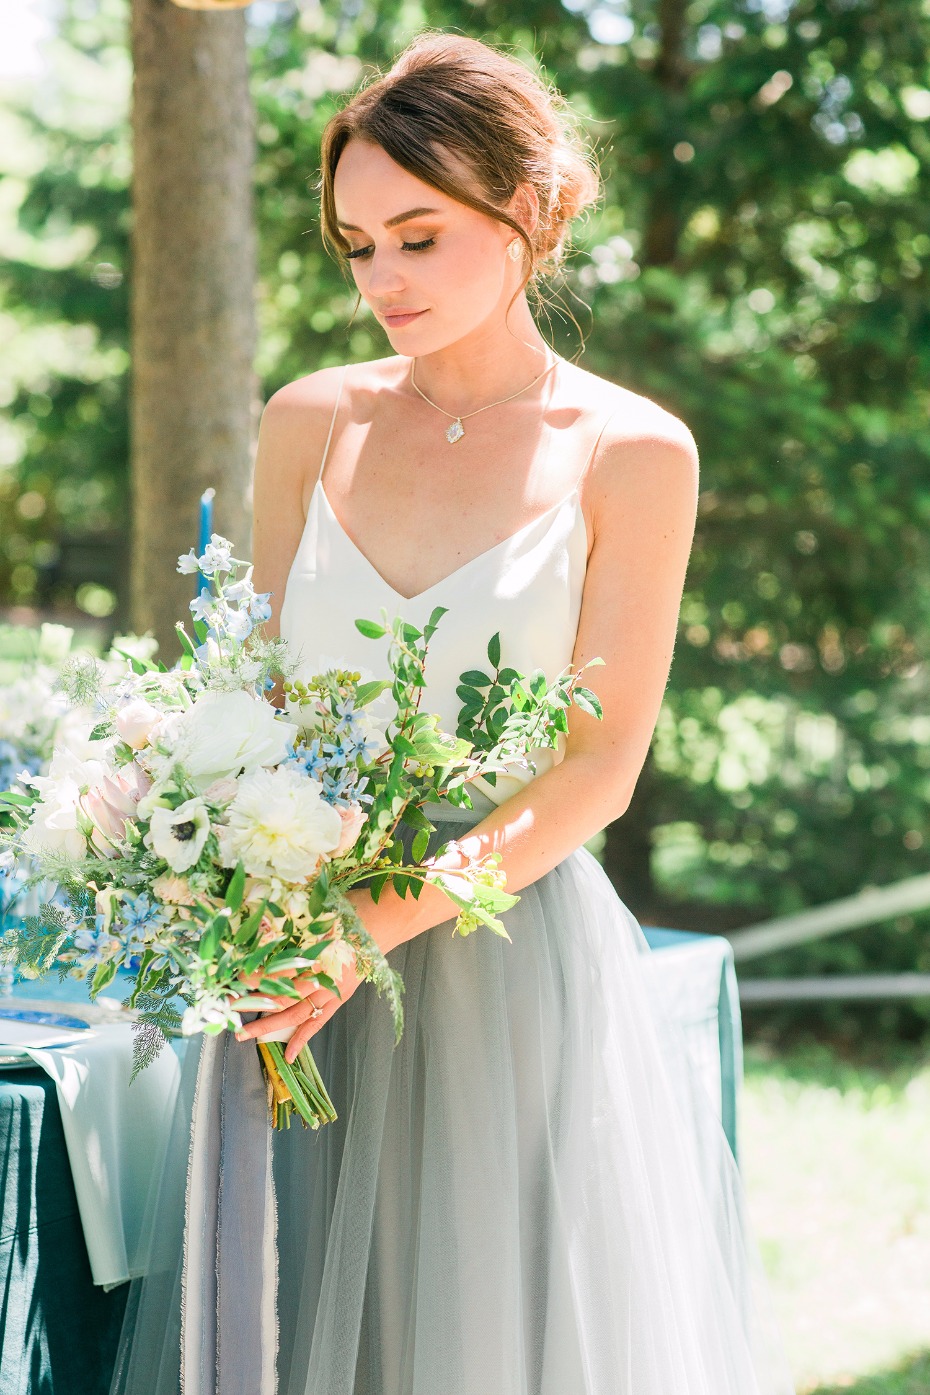 Simple and sophisticated bridal look